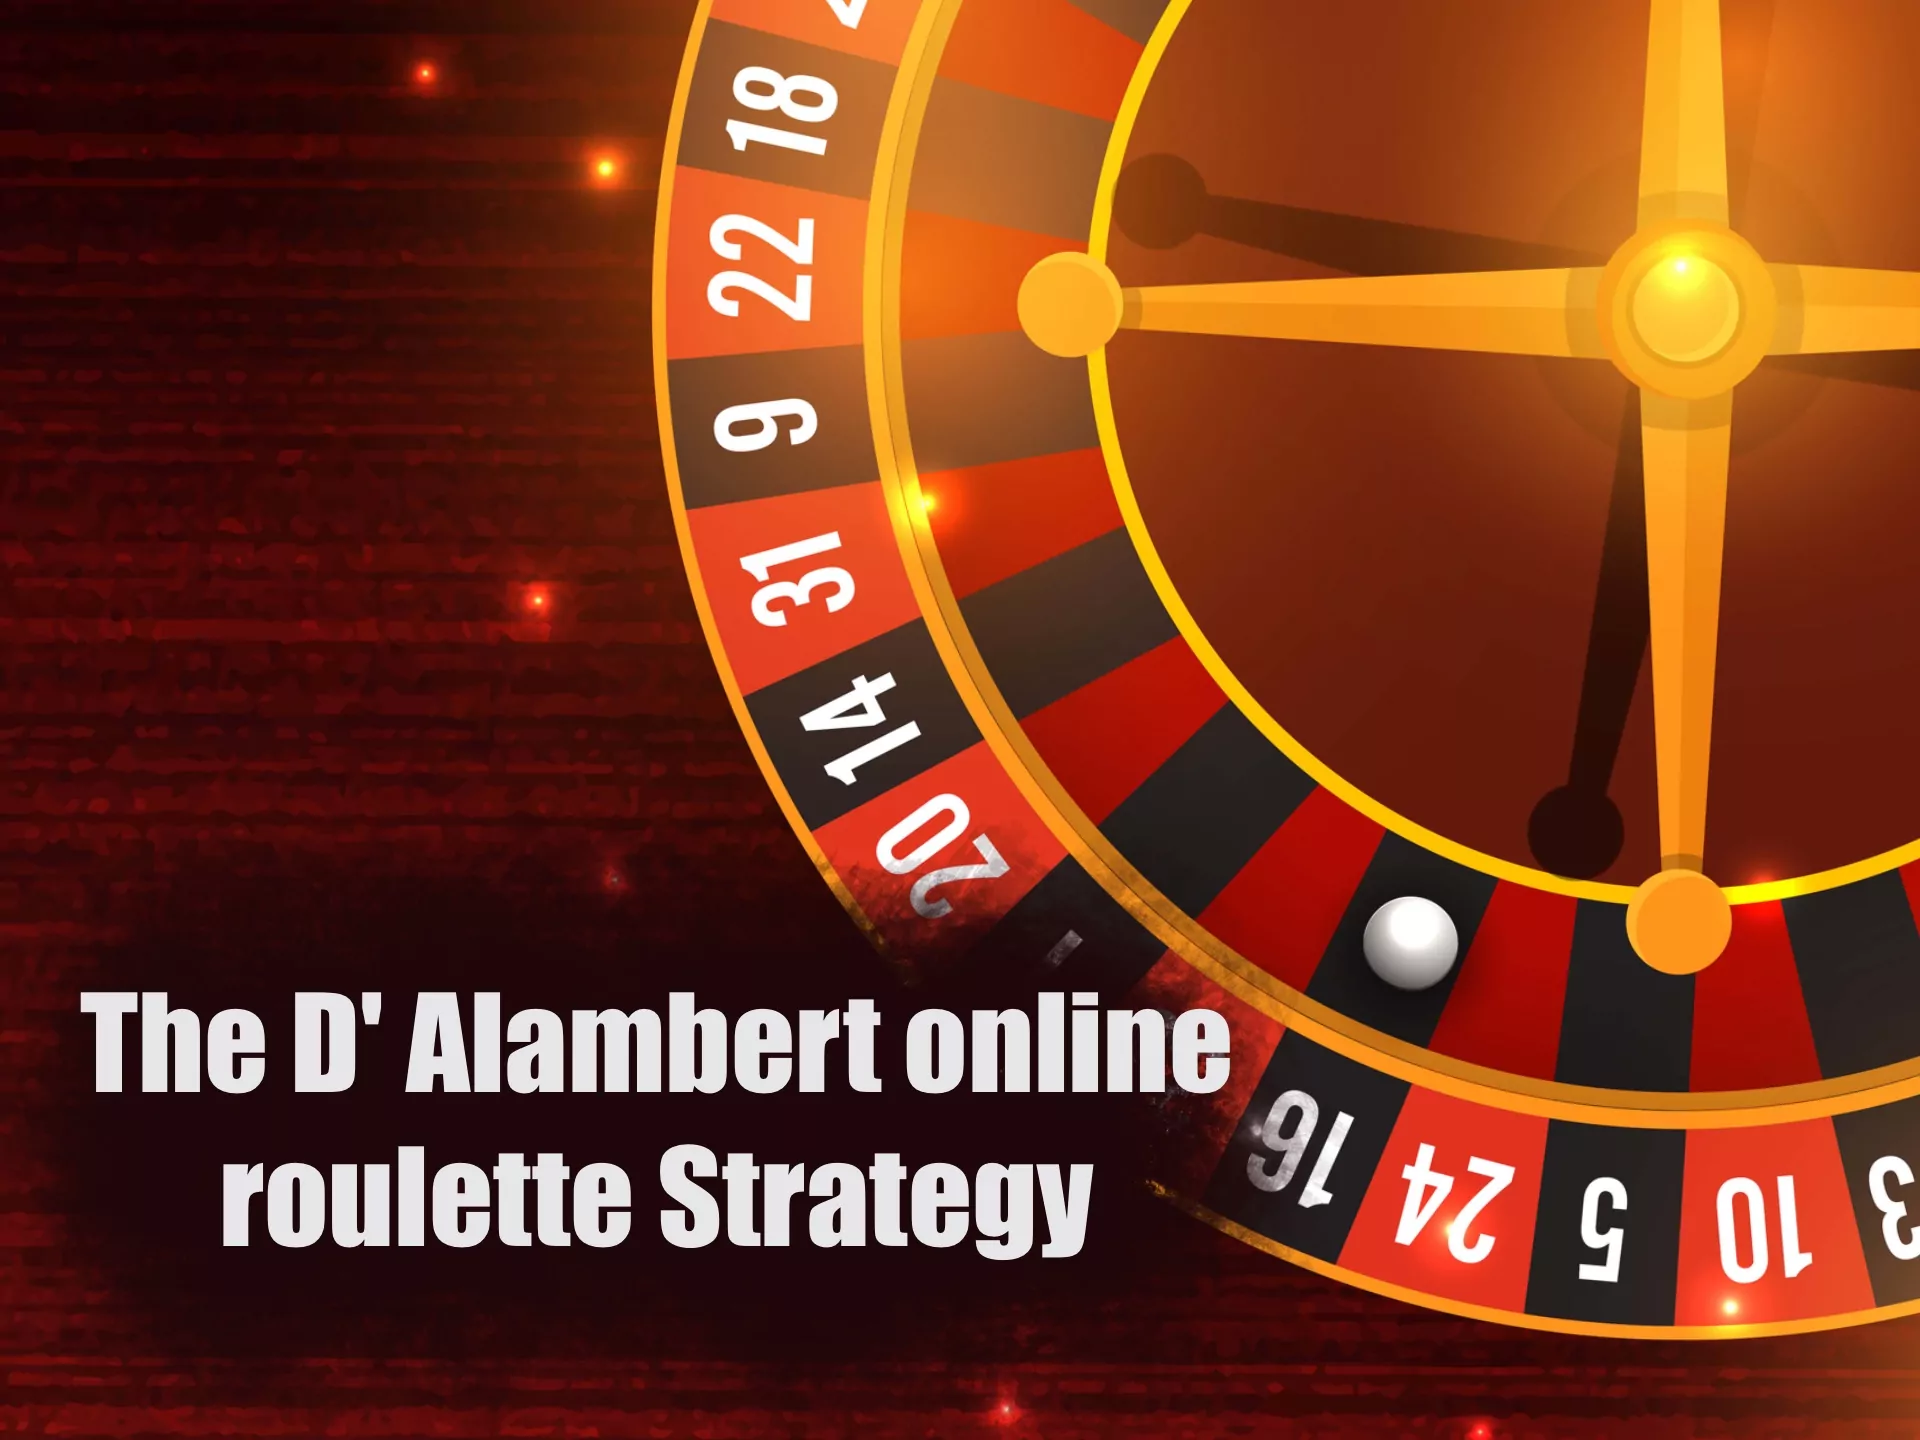 Play online roulette at any online casino you have read about on our website.